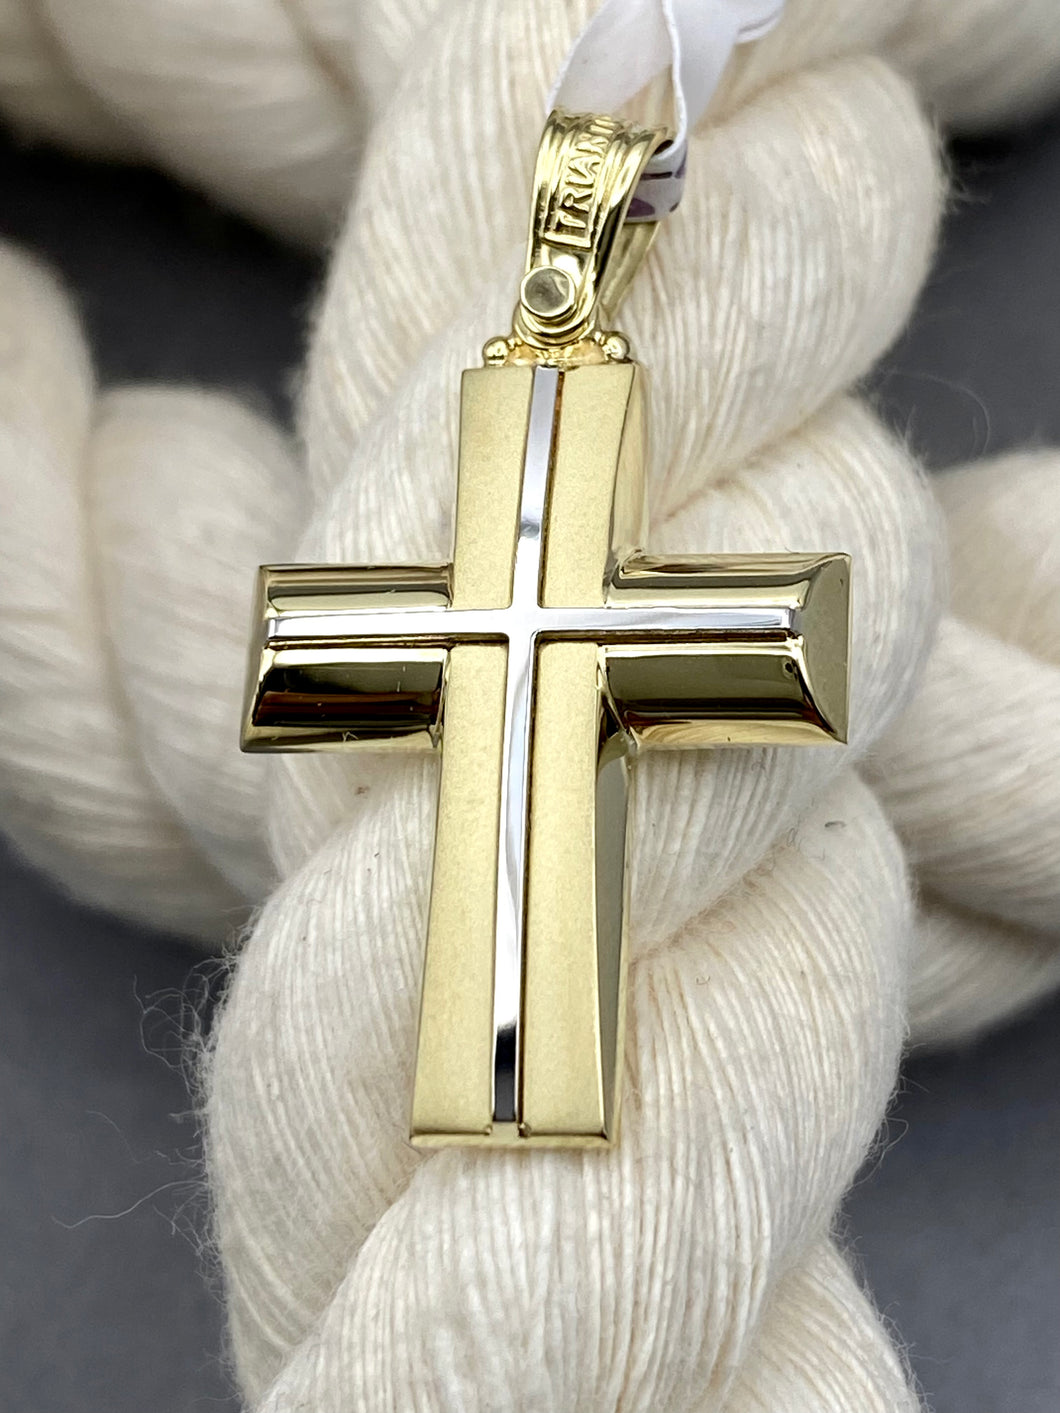 Triantos 14k 2 Tone White and Yellow  Gold Cross Polished  and Brushed with Precious Stones 3.65g 222550